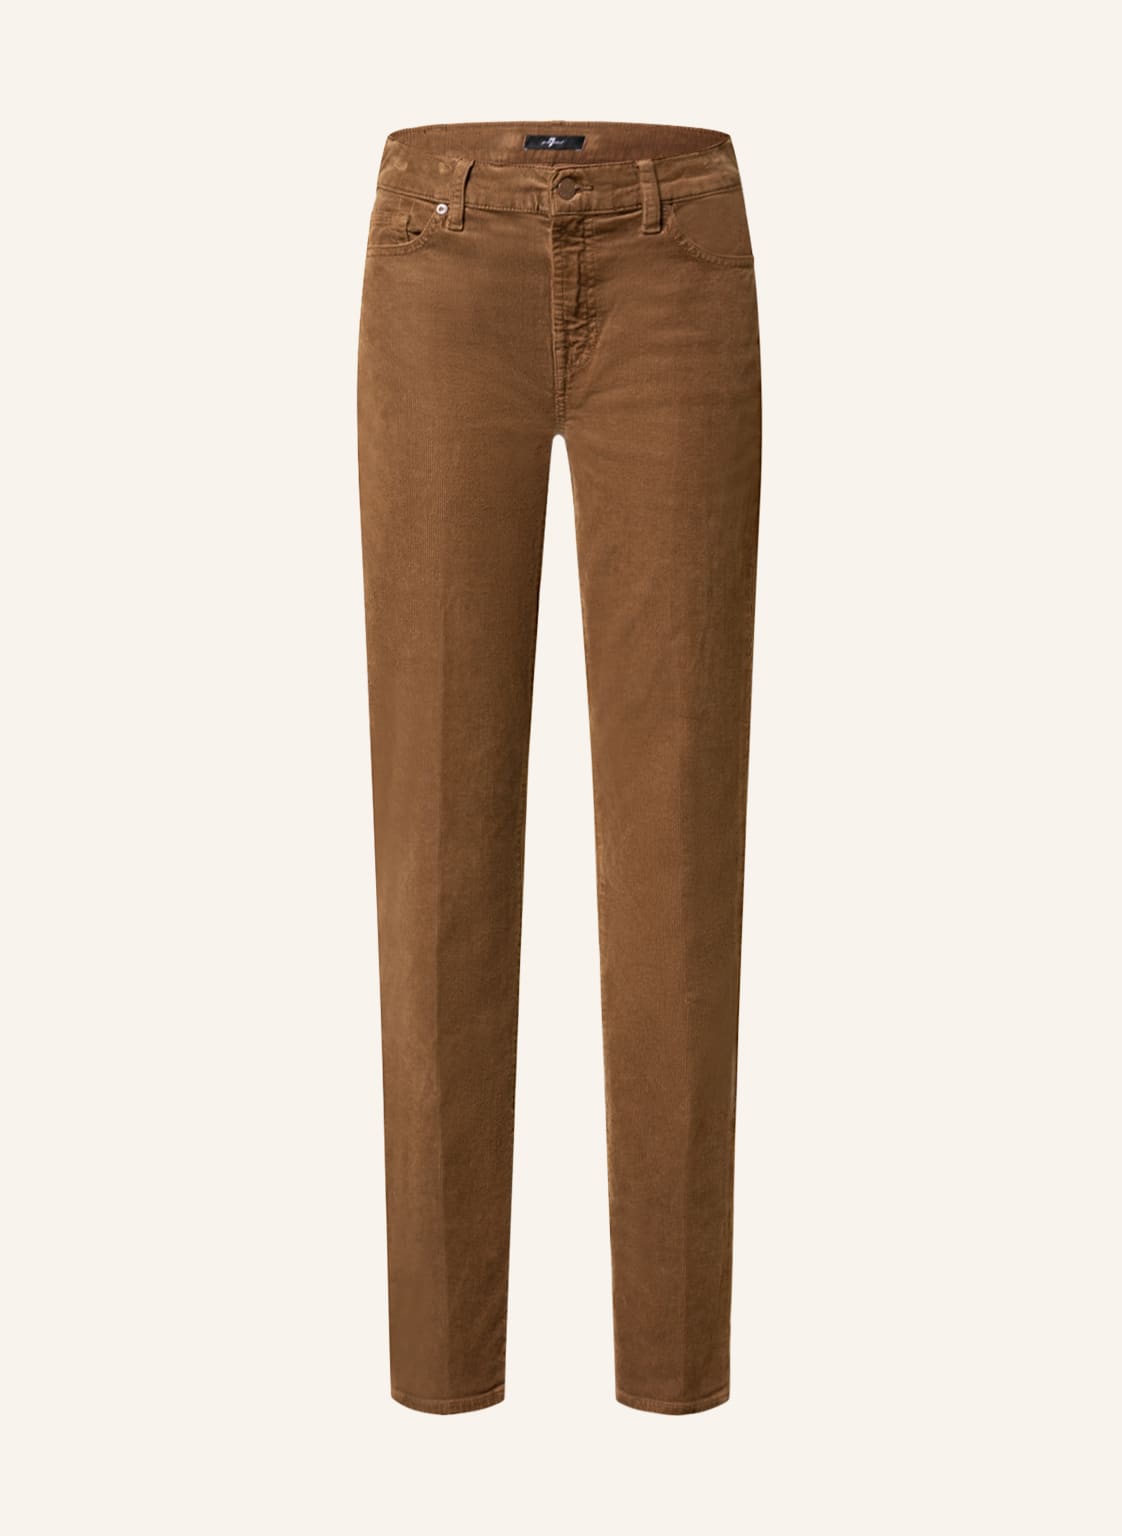 Image of 7 For All Mankind Cordhose Roxanne beige